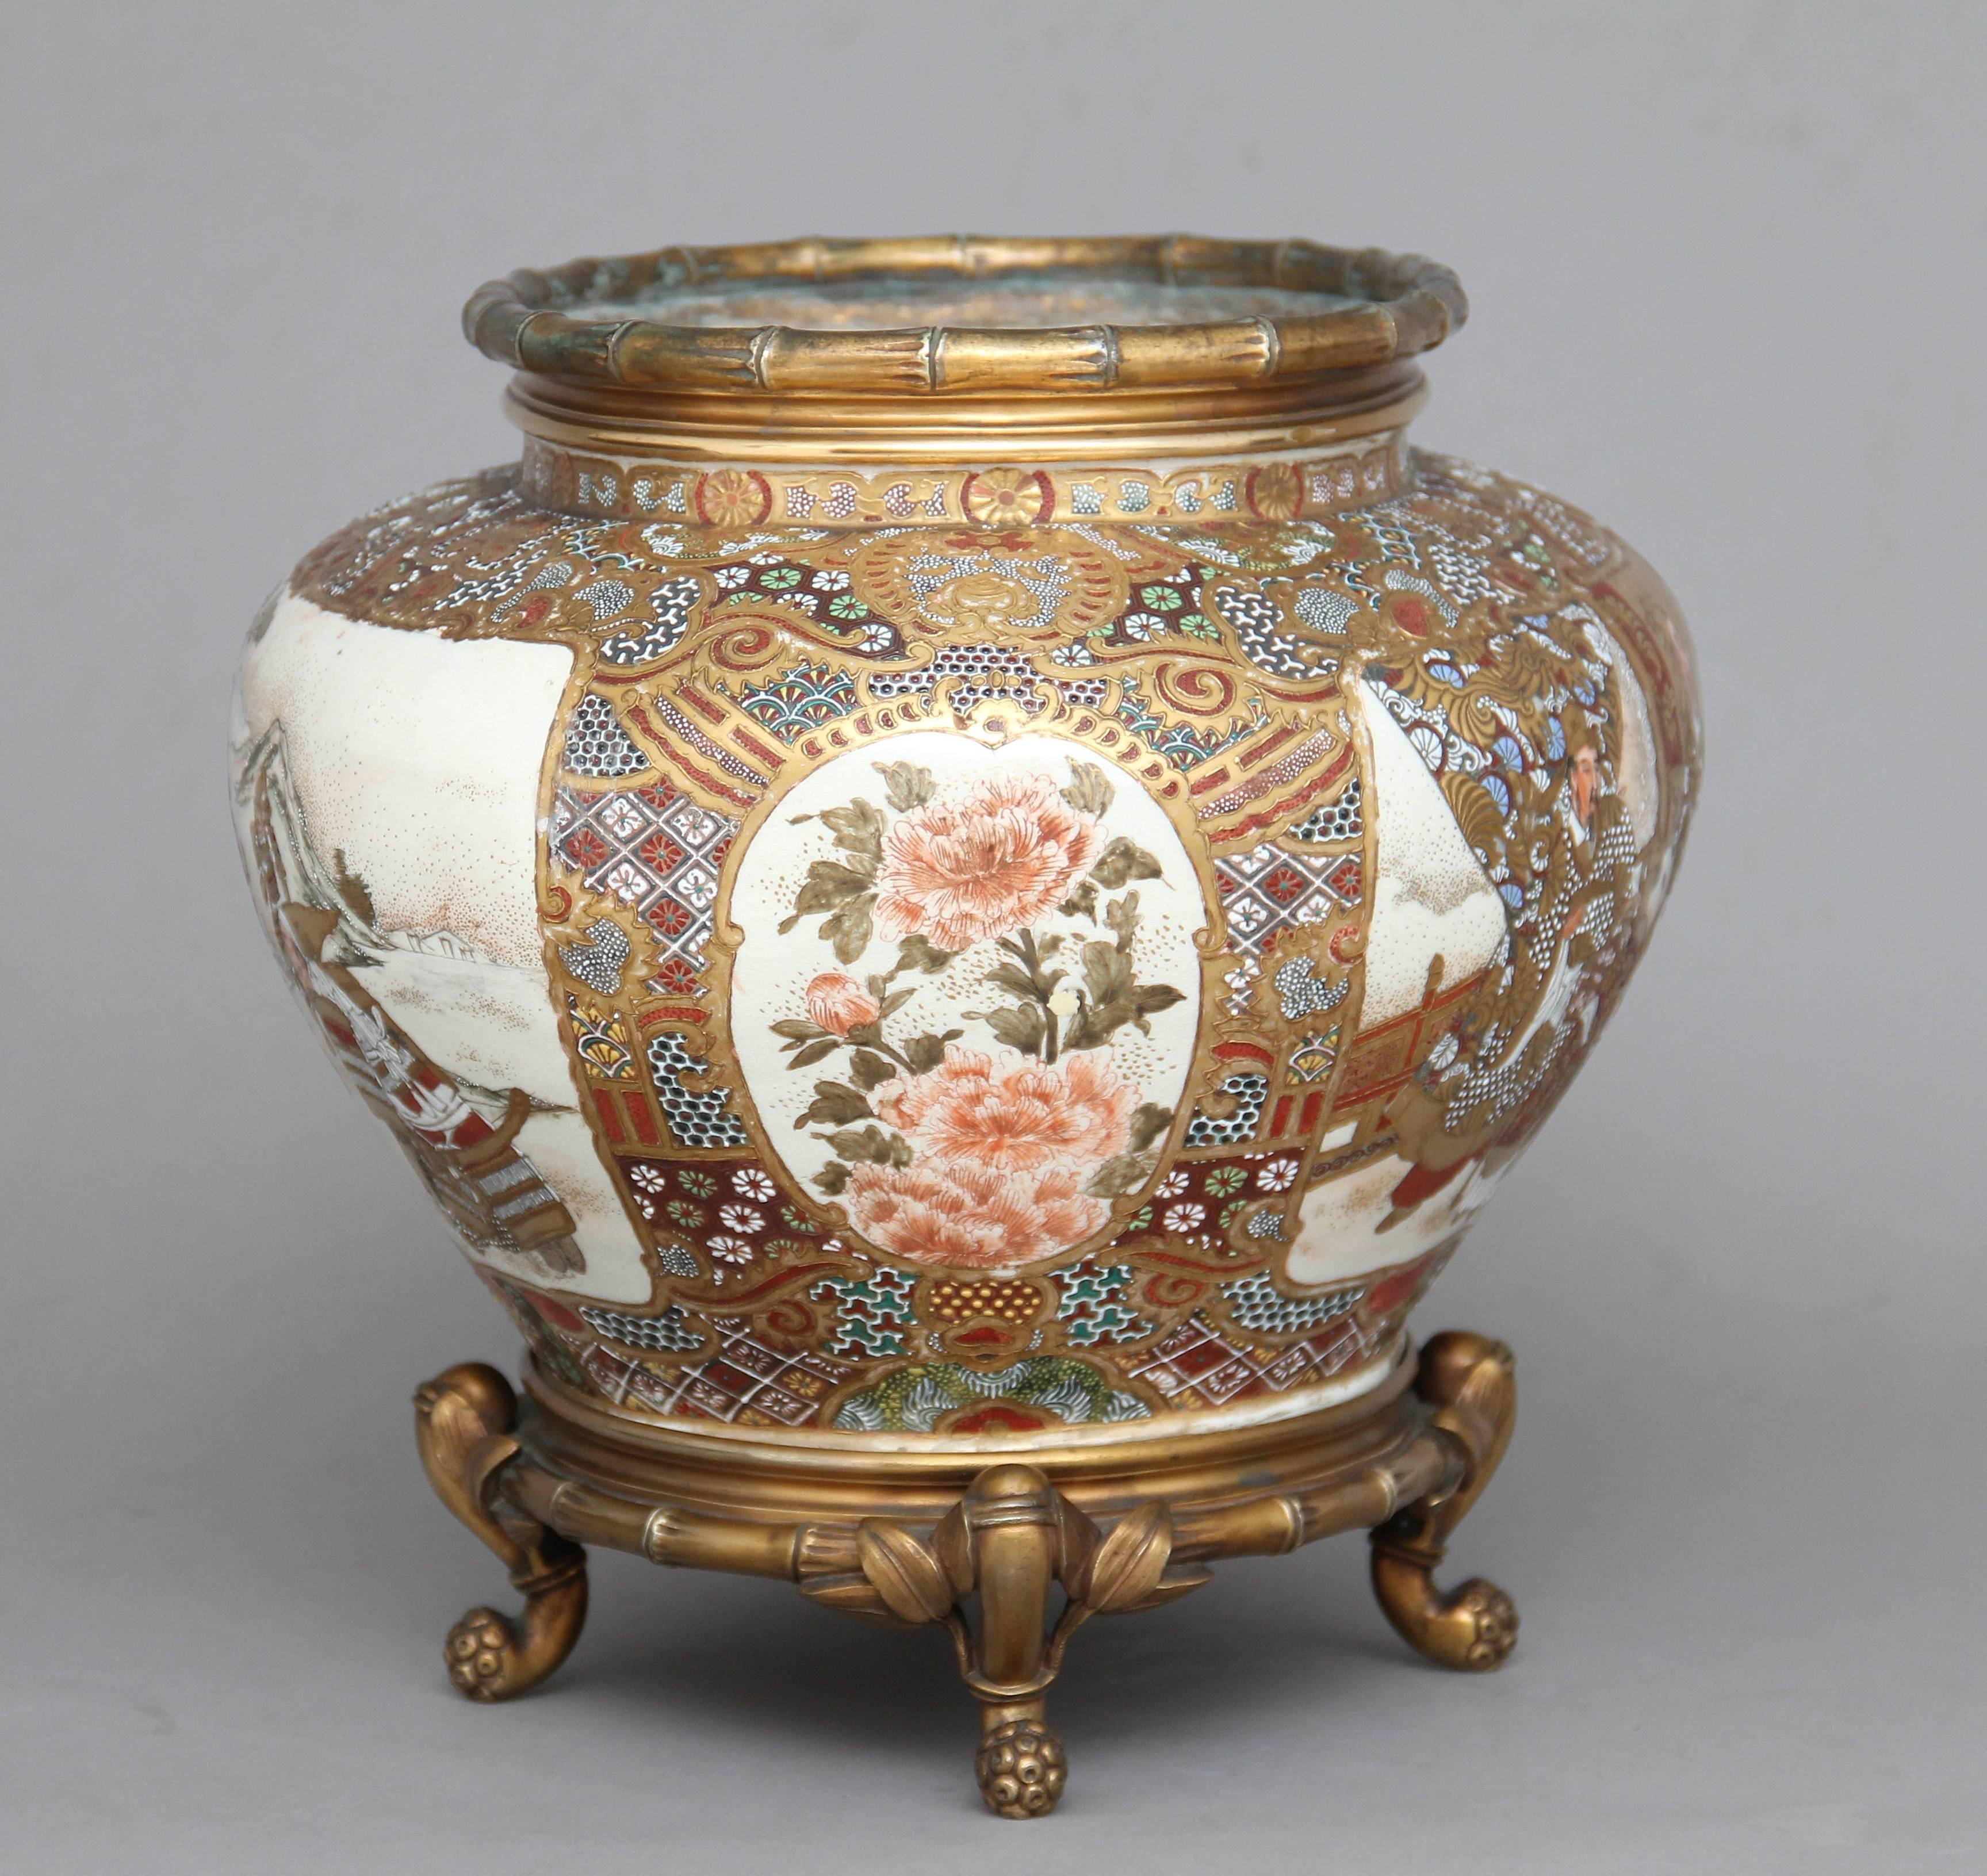 A lovely quality 19th century Japanese Satsuma and ormolu-mounted bowl, the oval shaped top decorated with an ormolu mock bamboo rim, the bowl depicting two scenes, one of a group of samurai warriors in a Japanese country side, the other depicting a